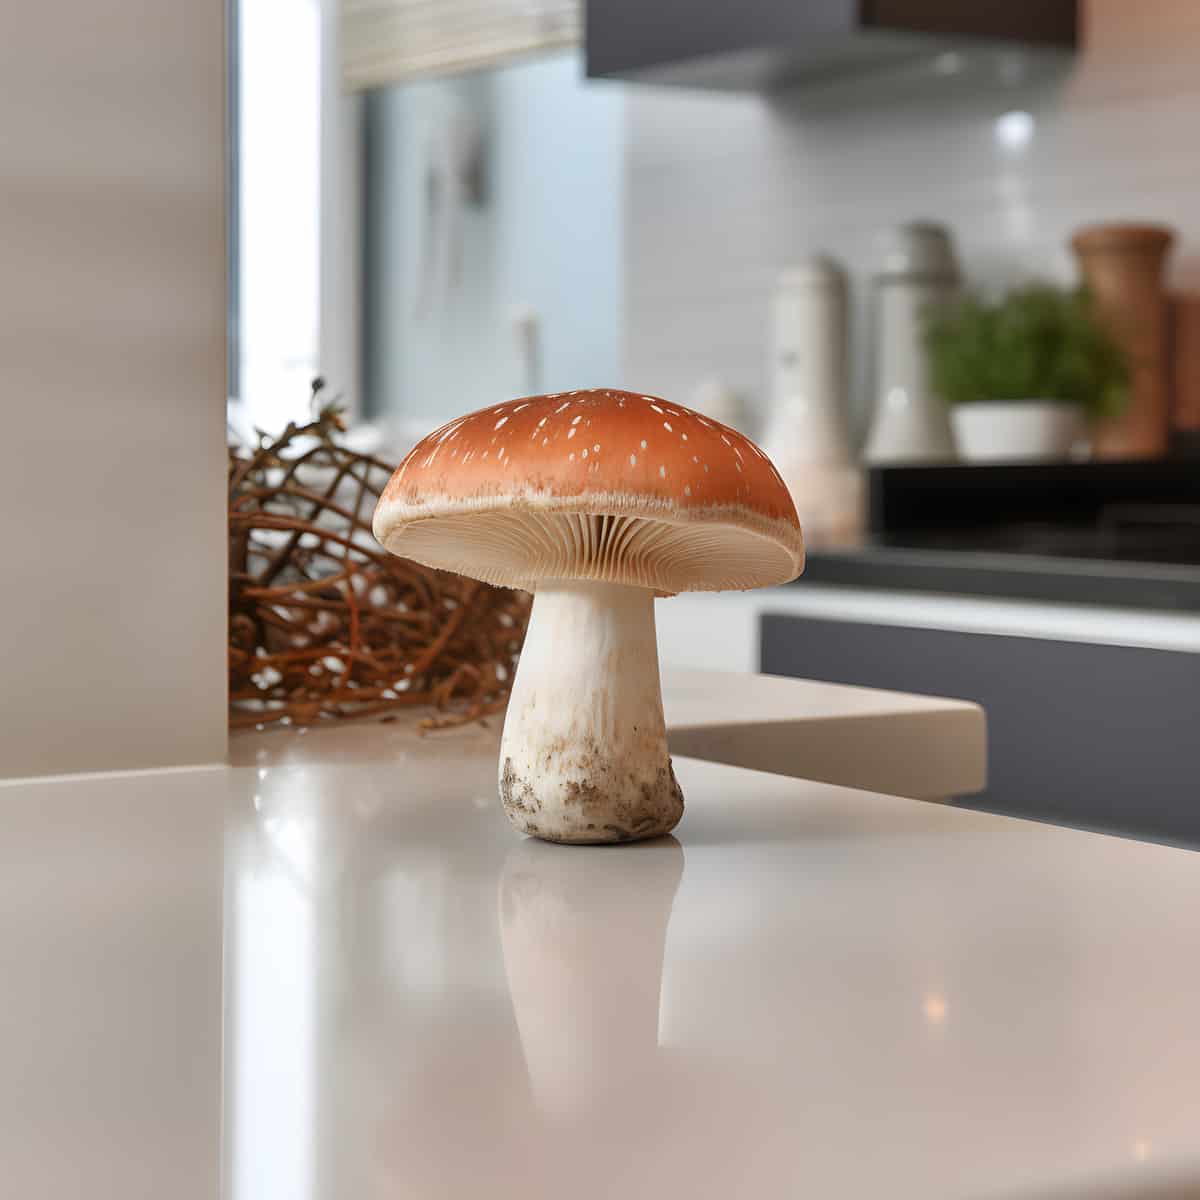 Button Mushrooms on a kitchen counter